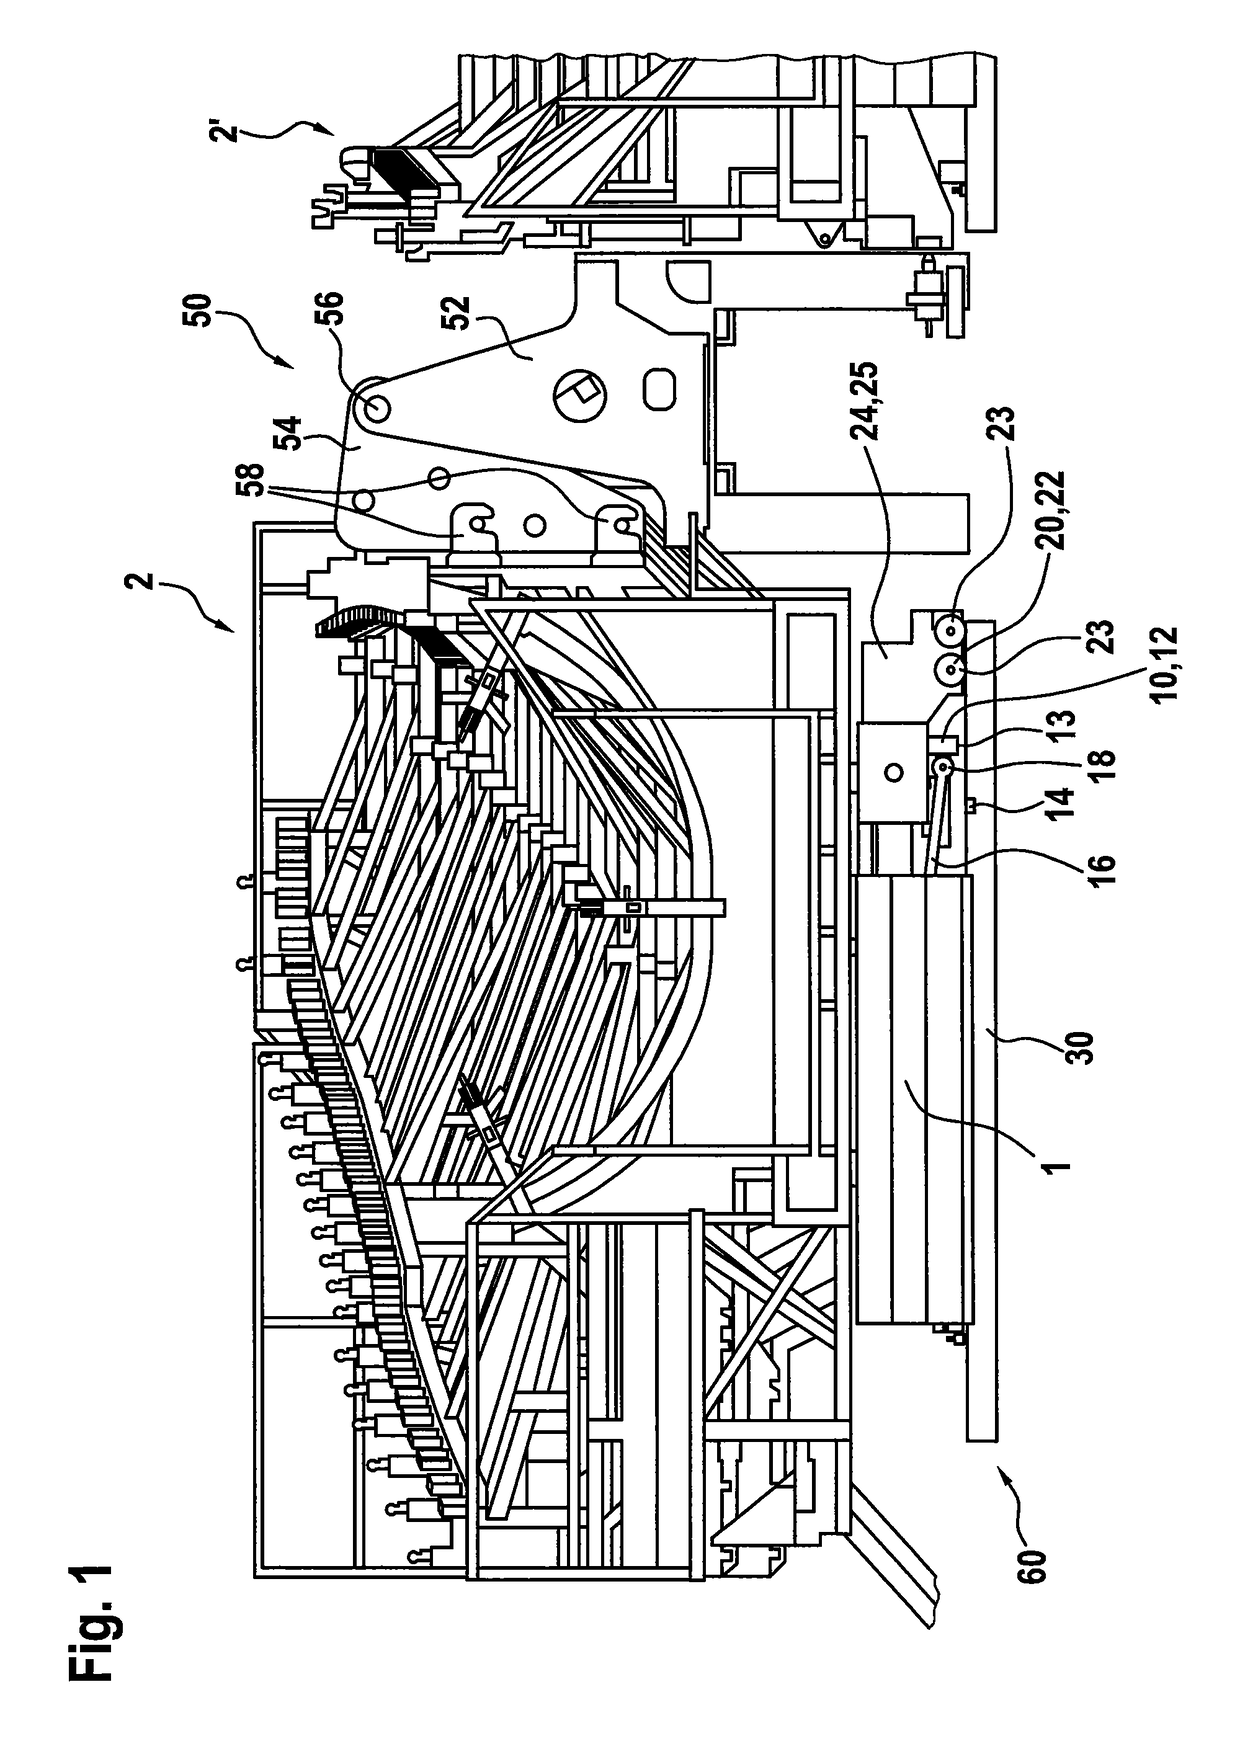 Handling device for handling a rotor blade mold for producing a rotor blade of a wind turbine